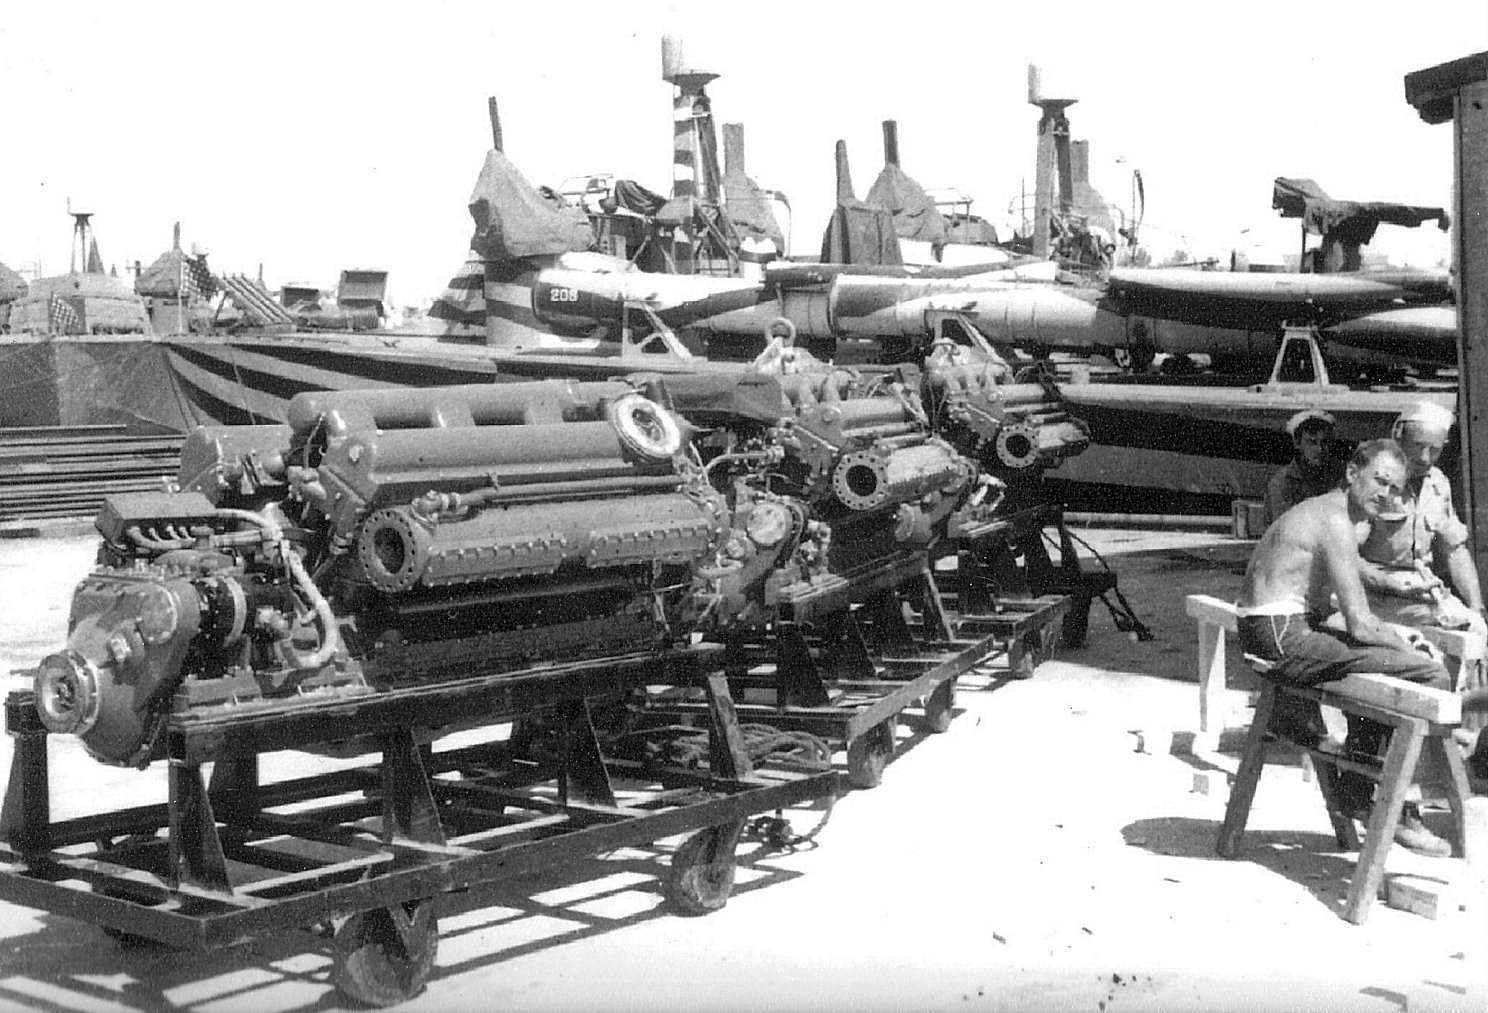 PT-208, a Higgins 78-foot motor torpedo boat in zebra paint, receiving three new Packard W-14 M2500 replacement engines at Bizerte, Tunisia, 1943. Note the raised rocket launcher rails on the bow.